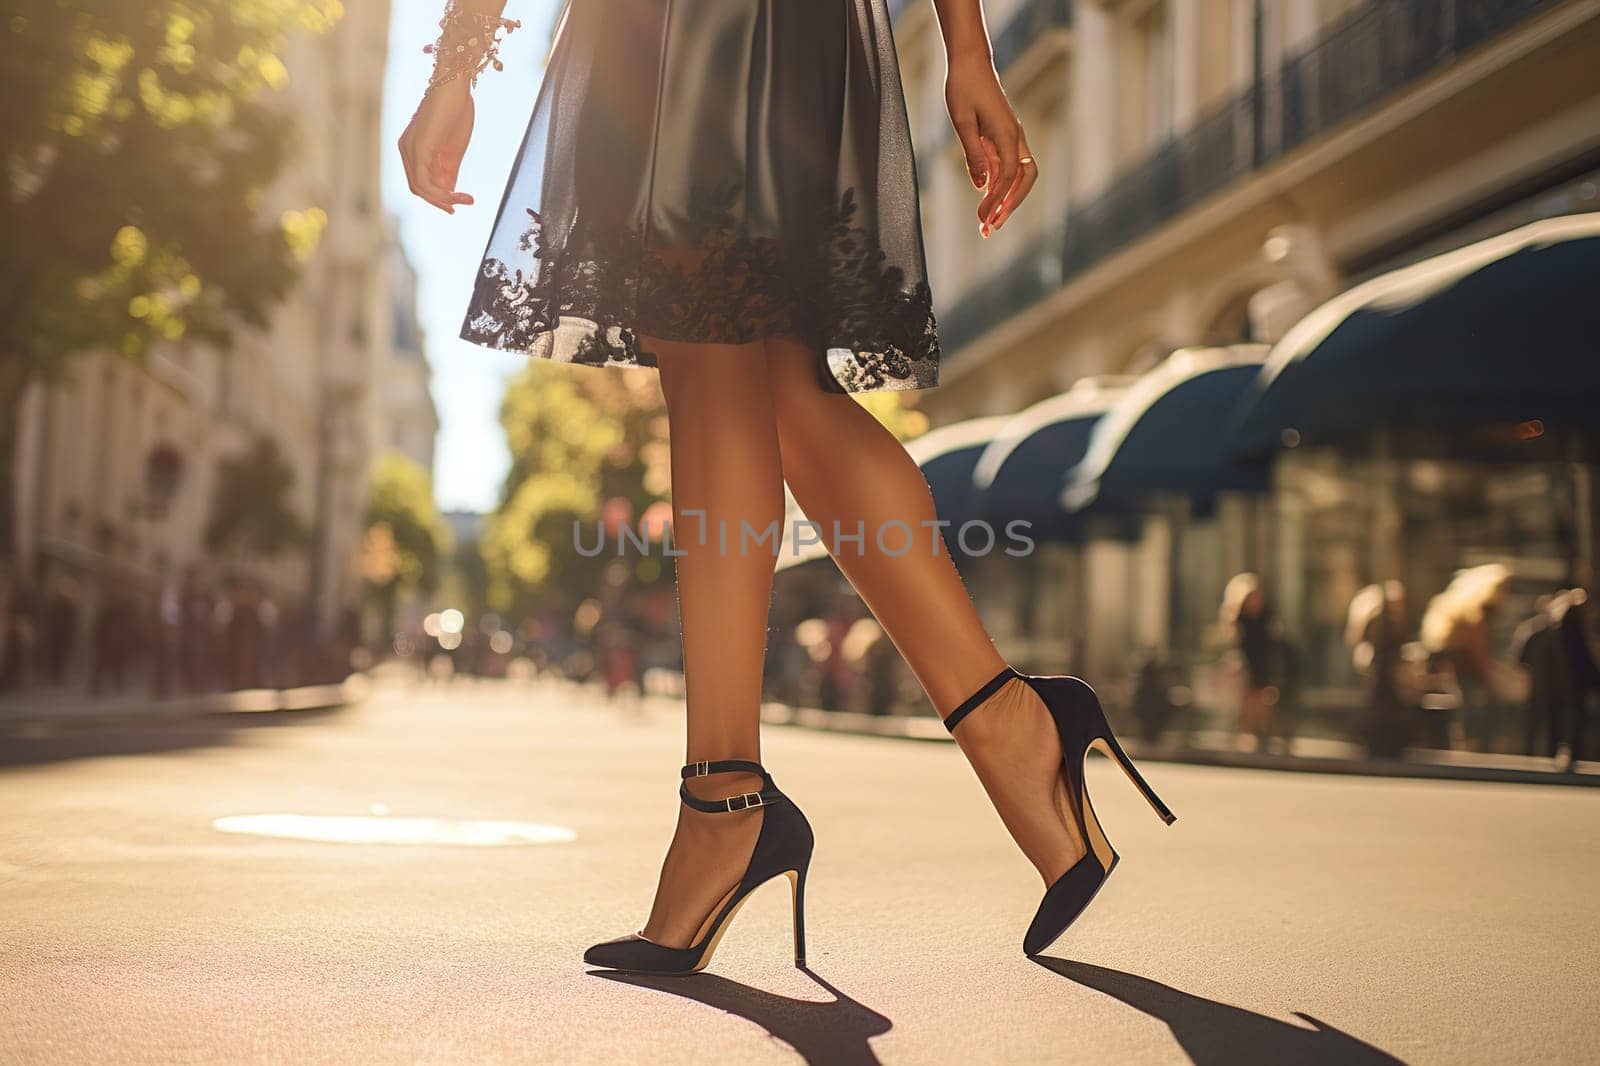 Slender female legs in high-heeled shoes on a city street.